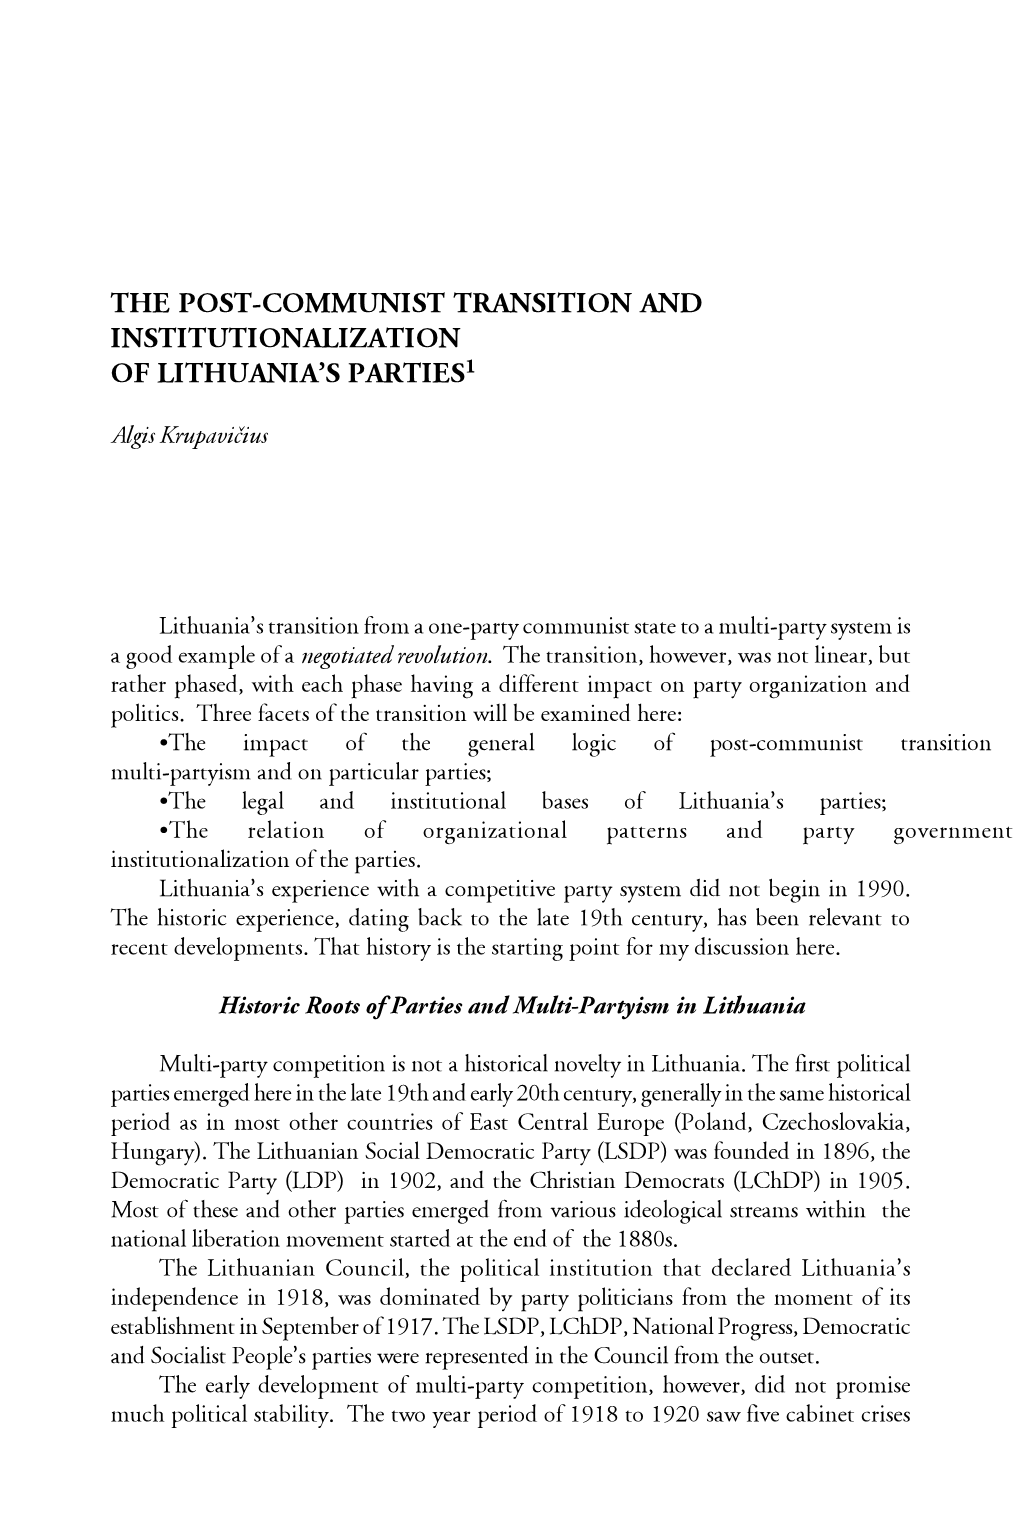 The Post-Communist Transition and Institutionalization of Lithuania's